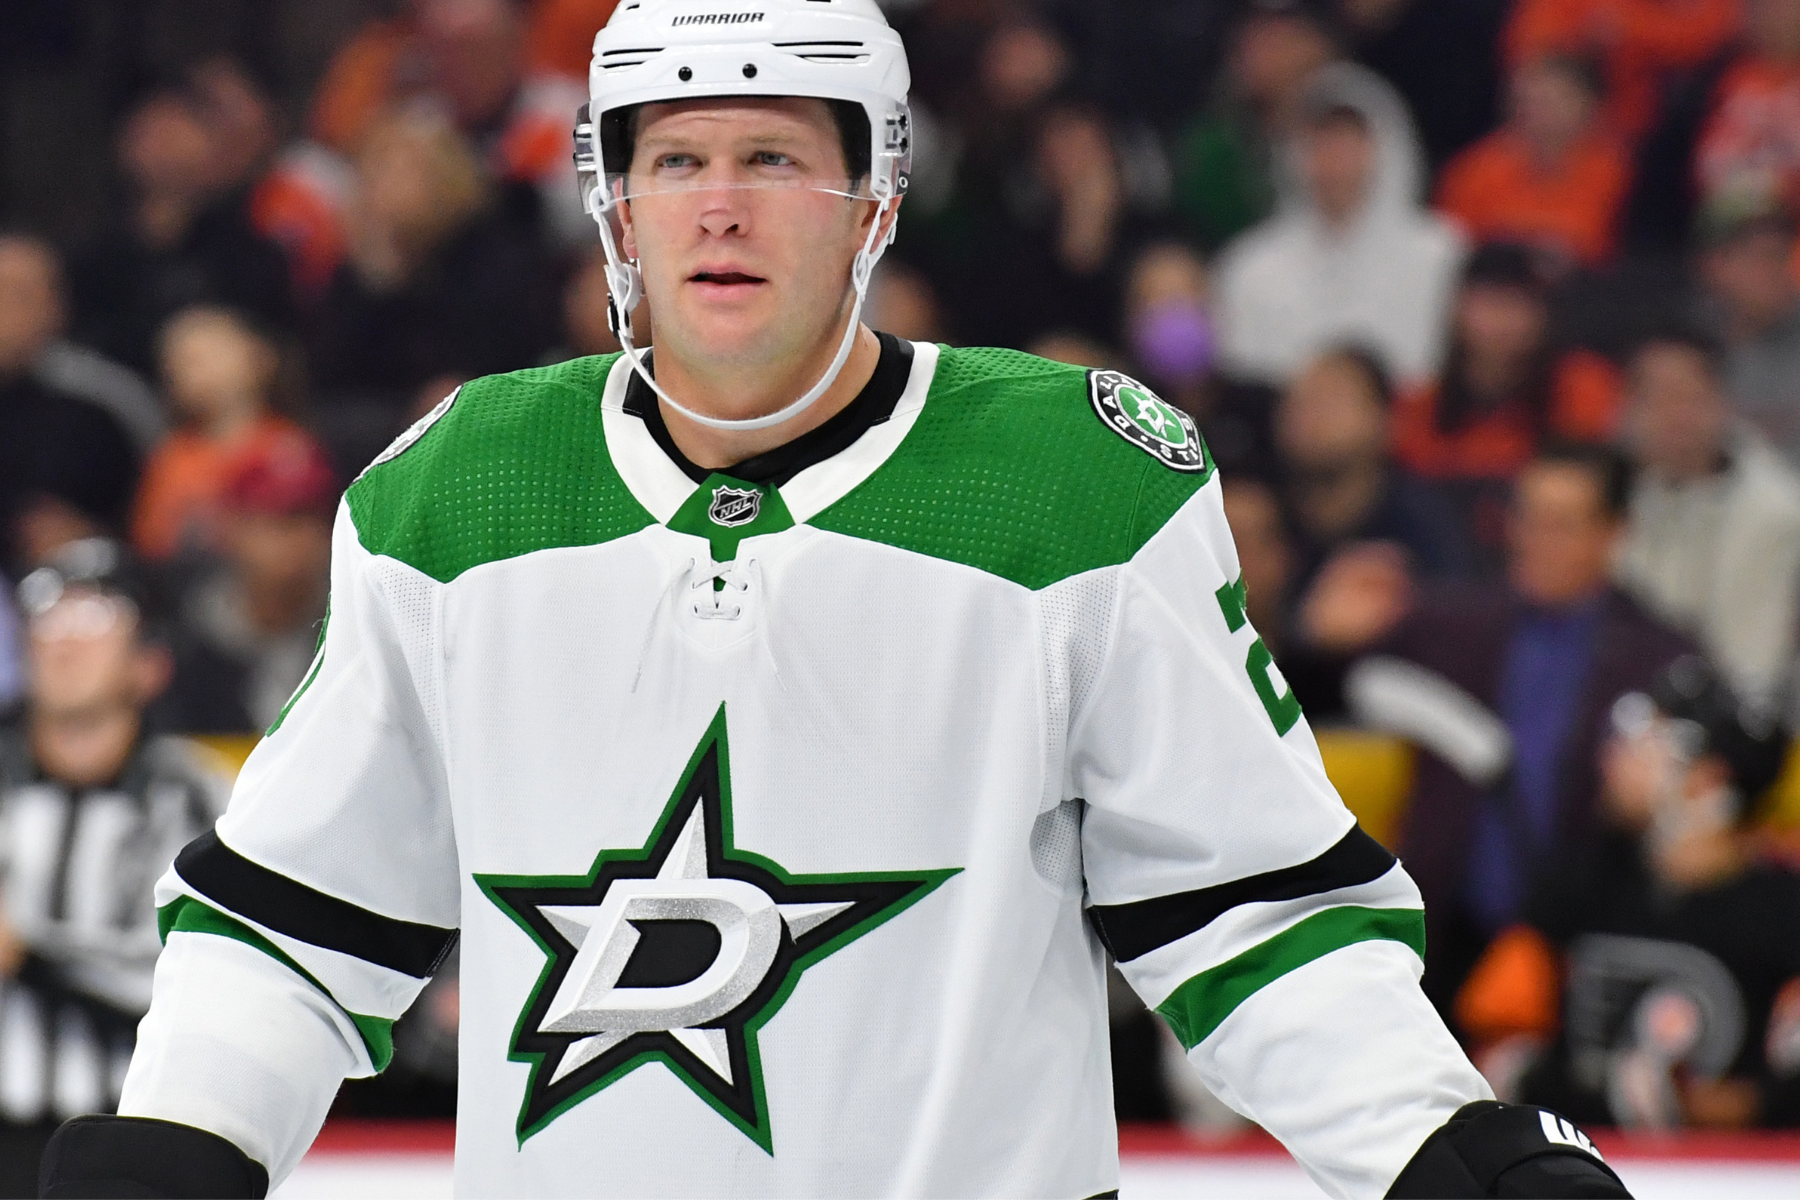 Ryan Suter Signs Multi-Year Contract With Stars - The Hockey News